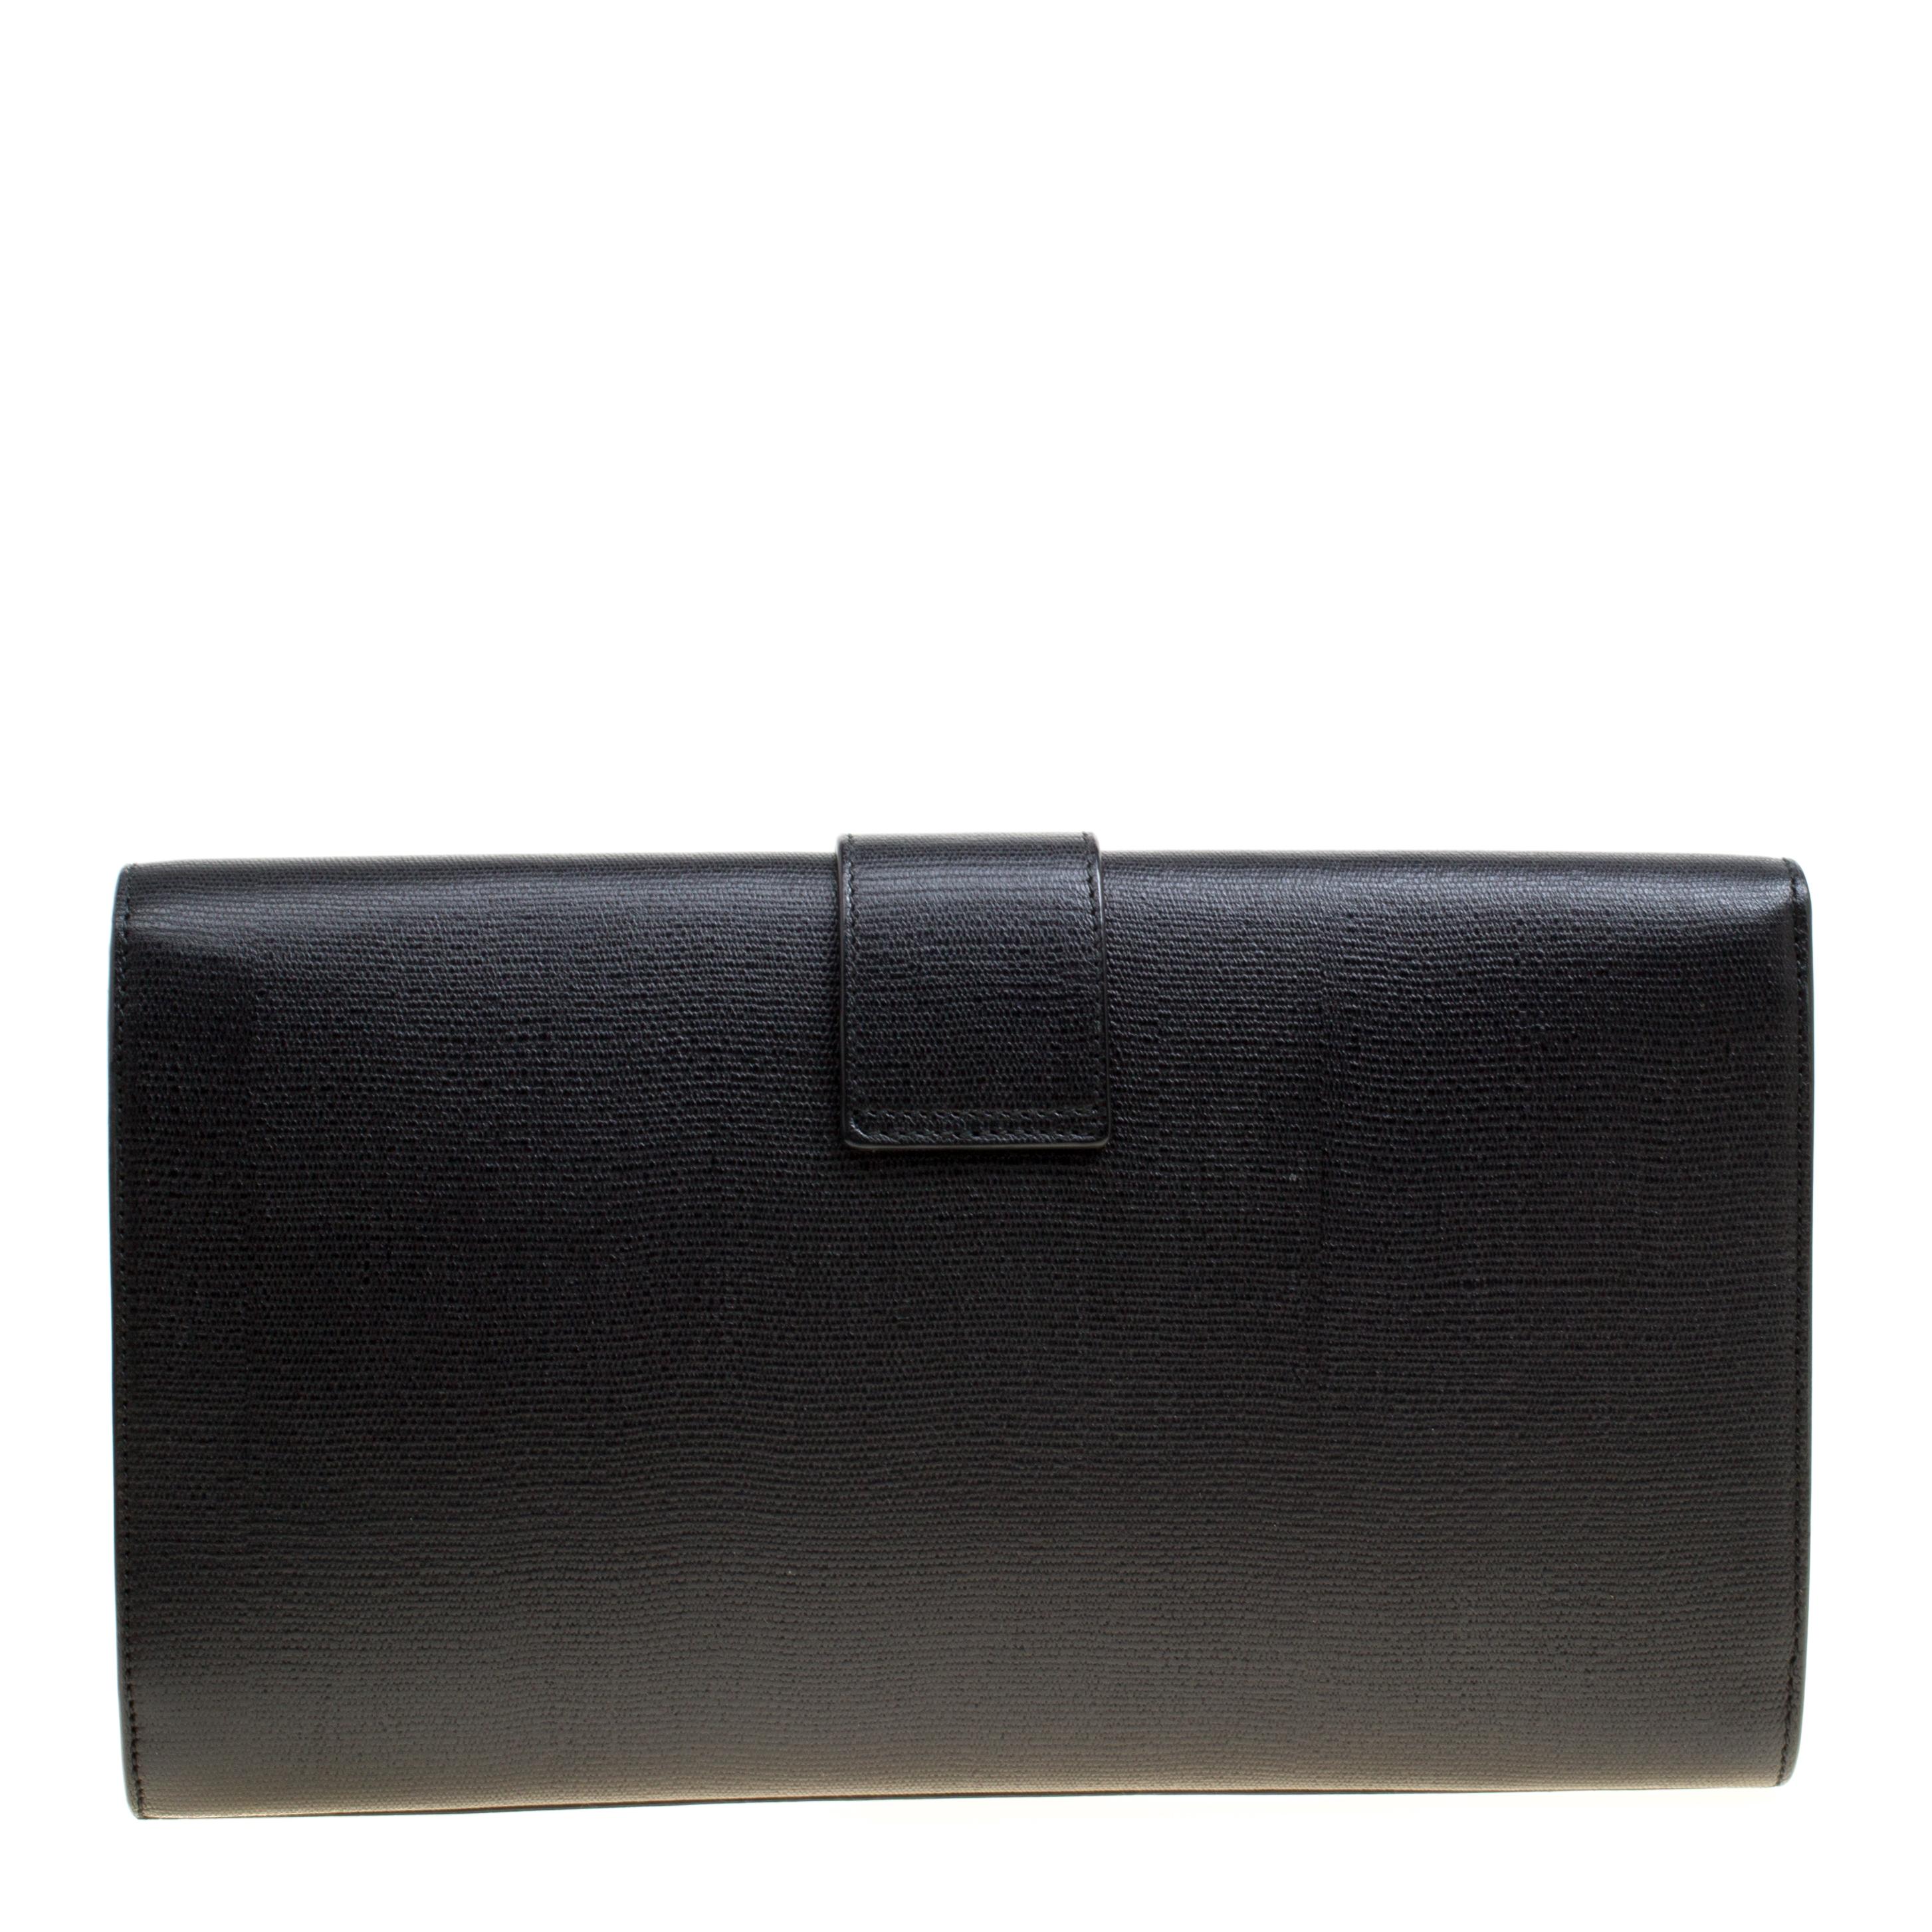 Classy and super stylish, this clutch is a Saint Laurent creation. It has been luxuriously crafted from leather and shaped to complement all your elegant outfits. The insides are lined with satin and sized to carry your necessities. The clutch is